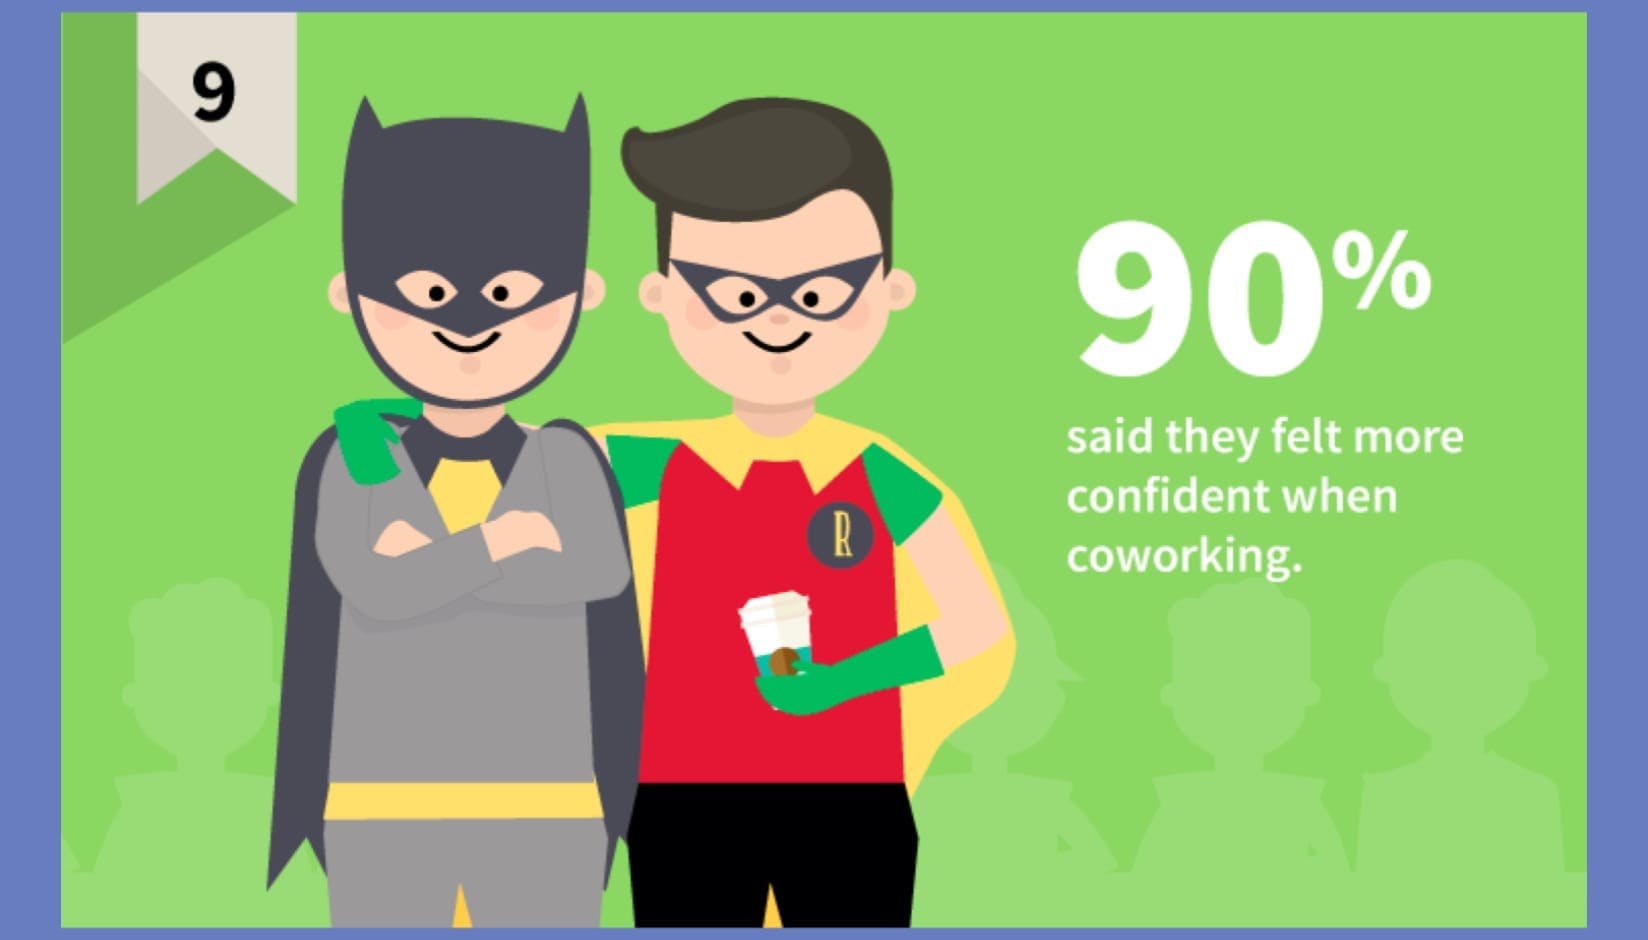 coworking member happiness statistics - infographic